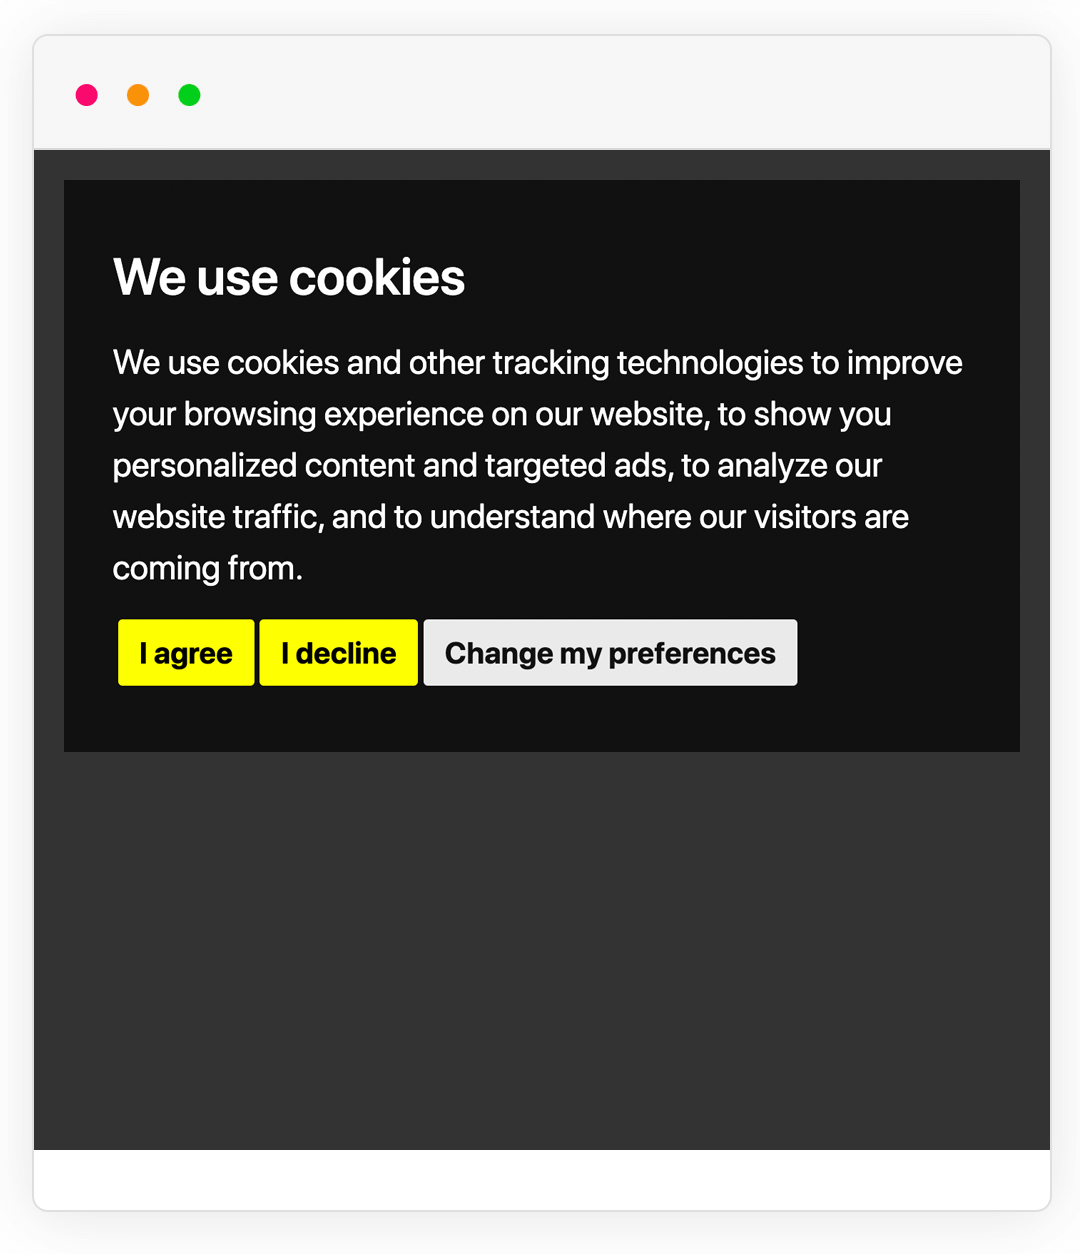 Example of Cookie Consent notice banner in a different style for the banner